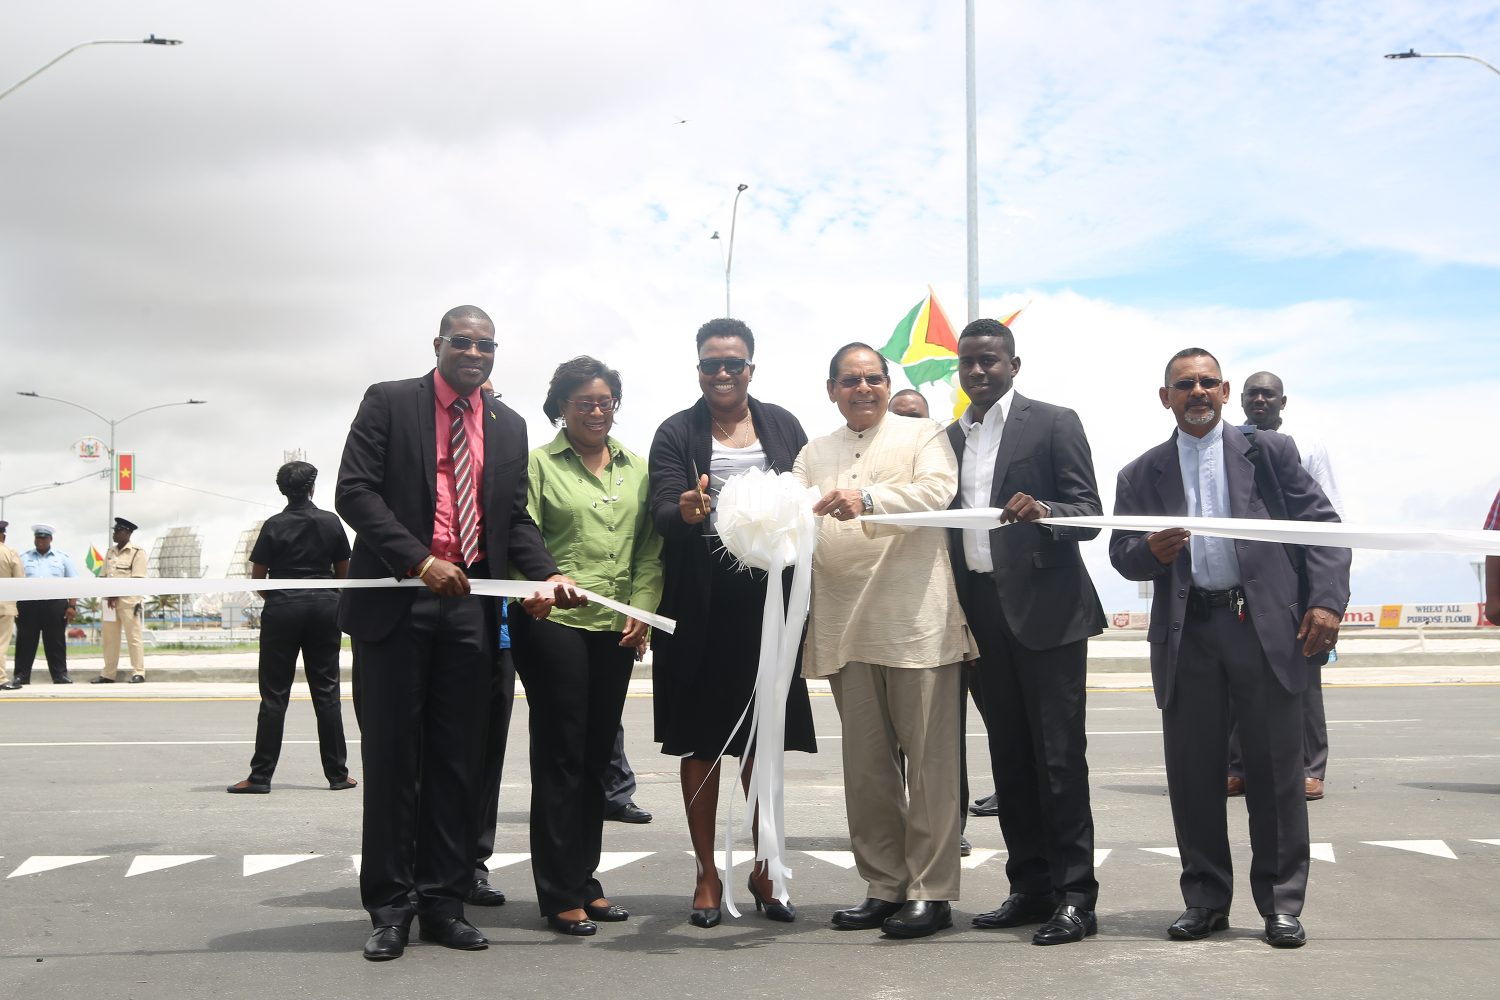 Minister within the Ministry of Public Infrastructure Annette Ferguson (third, from left) cutting the ribbon to formally open the Kitty roundabout yesterday, along with Minister of Public Infrastructure David Patterson (left), Minister of Public Telecommunications Cathy Hughes (second, from left), Prime Minister Moses Nagamootoo (third, from right) and Deputy Mayor of Georgetown Akeem Peters (second, from right). (Photo by Terrence Thompson)

